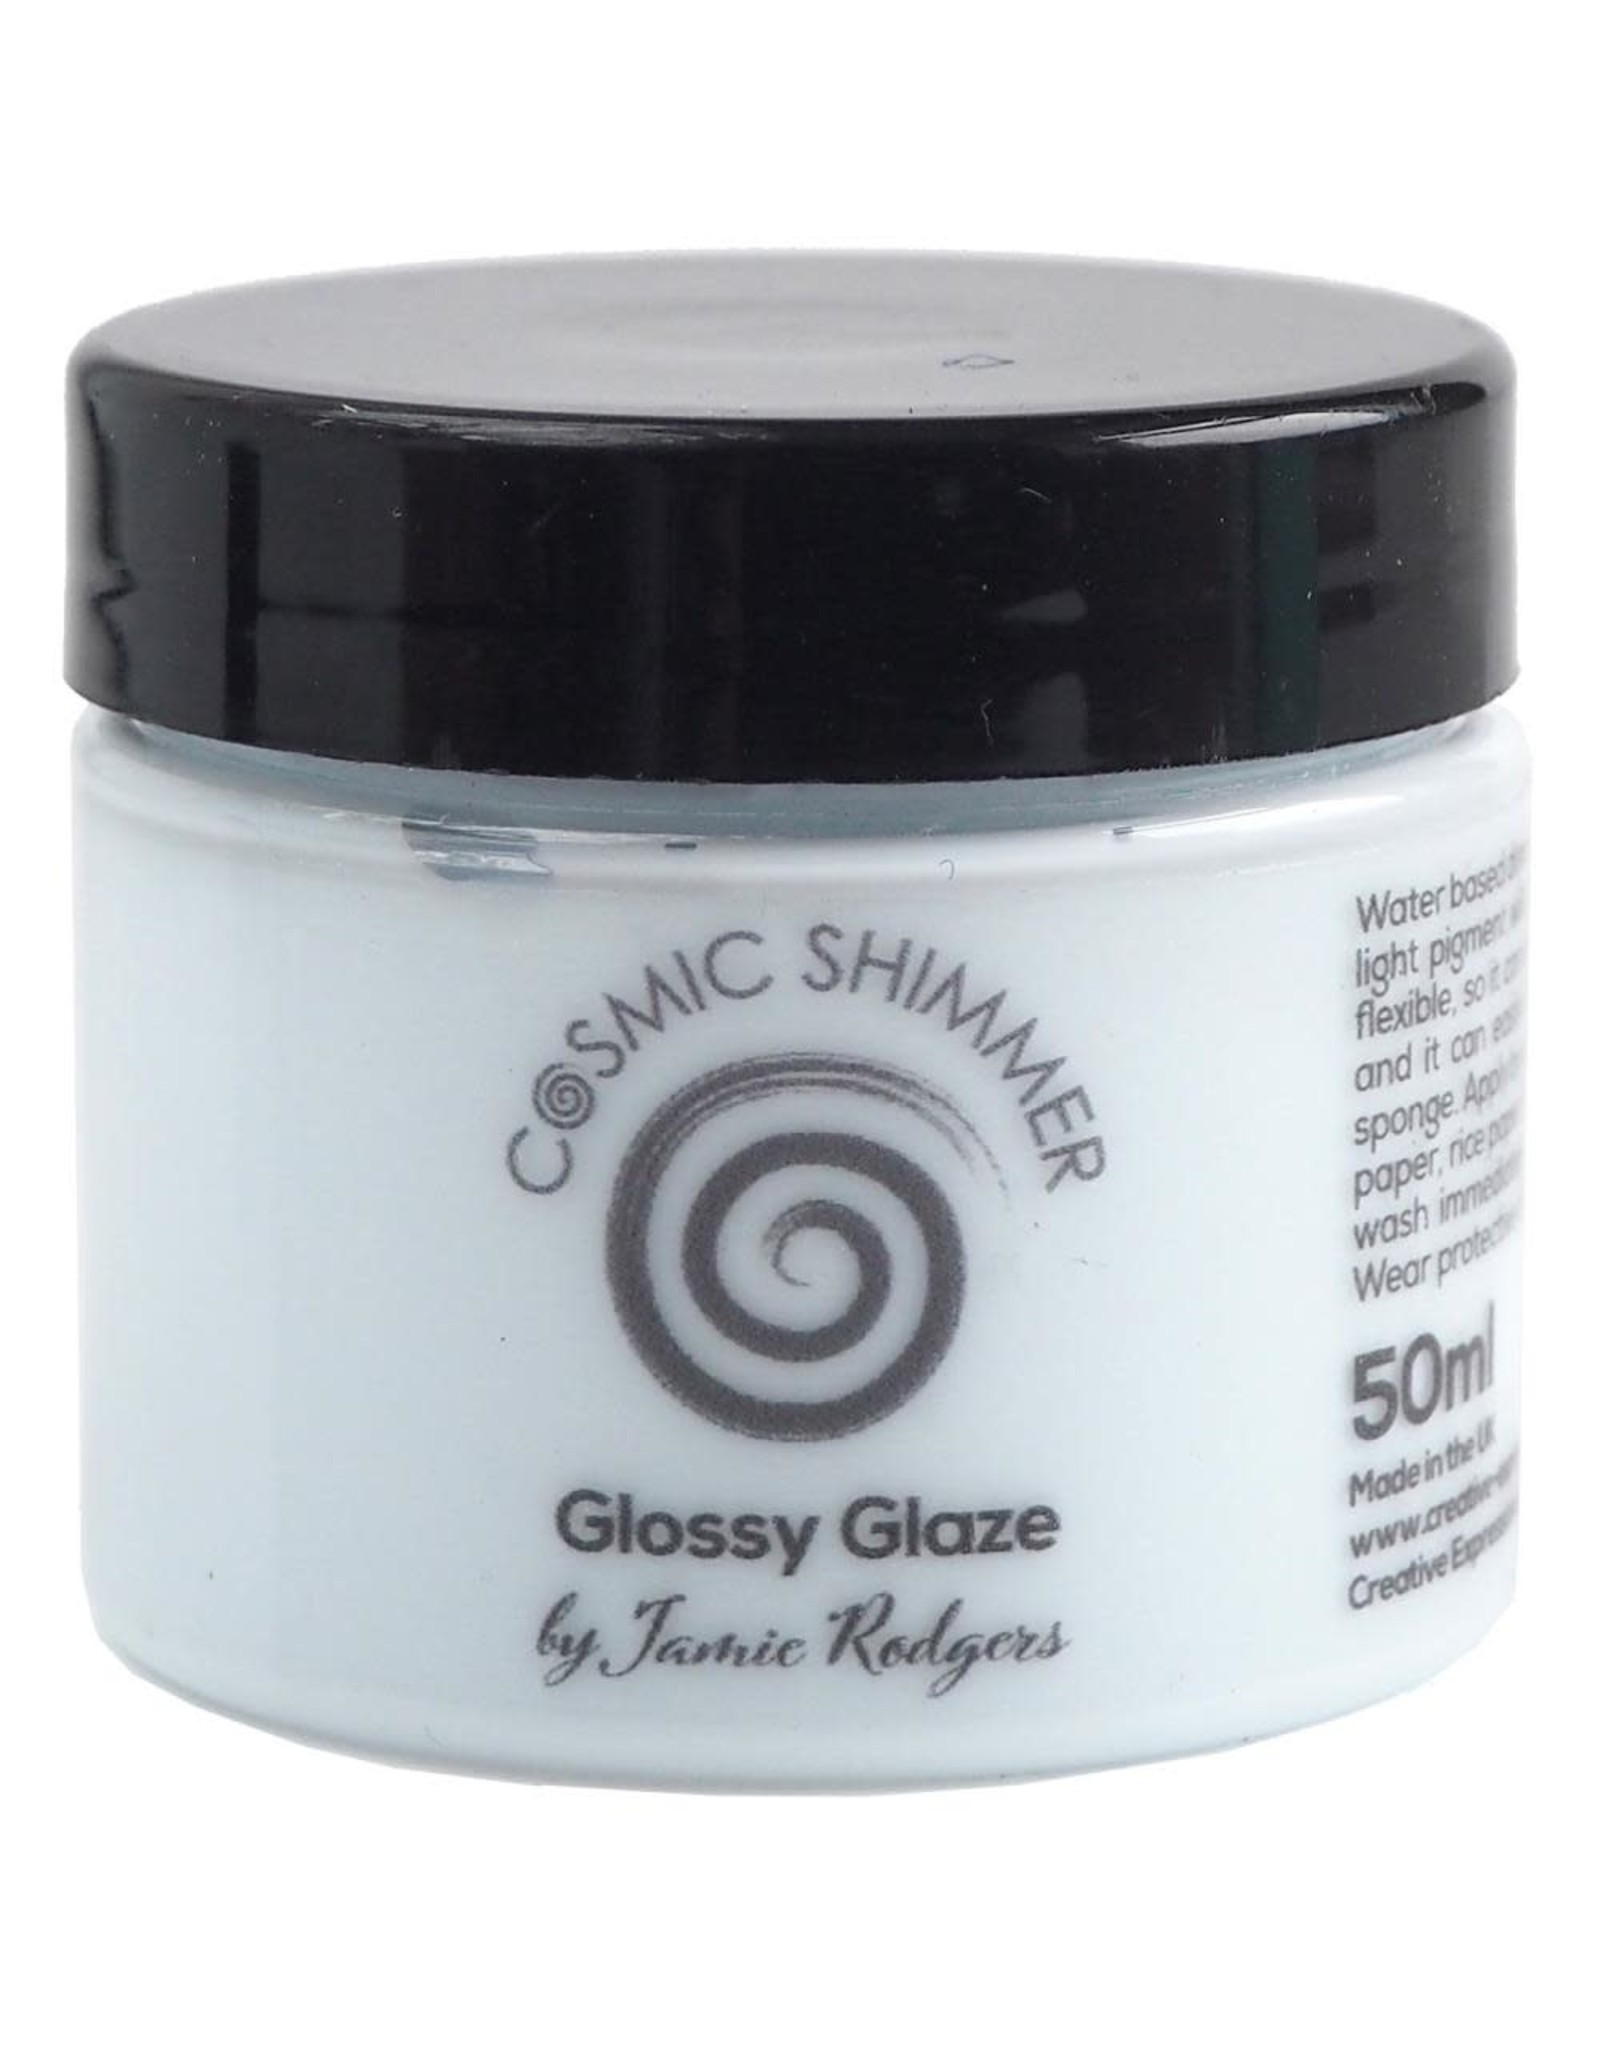 CREATIVE EXPRESSIONS CREATIVE EXPRESSION COSMIC SHIMMER JAMIE RODGERS FRESH AIR BLUE GLOSSY GLAZE 50ml